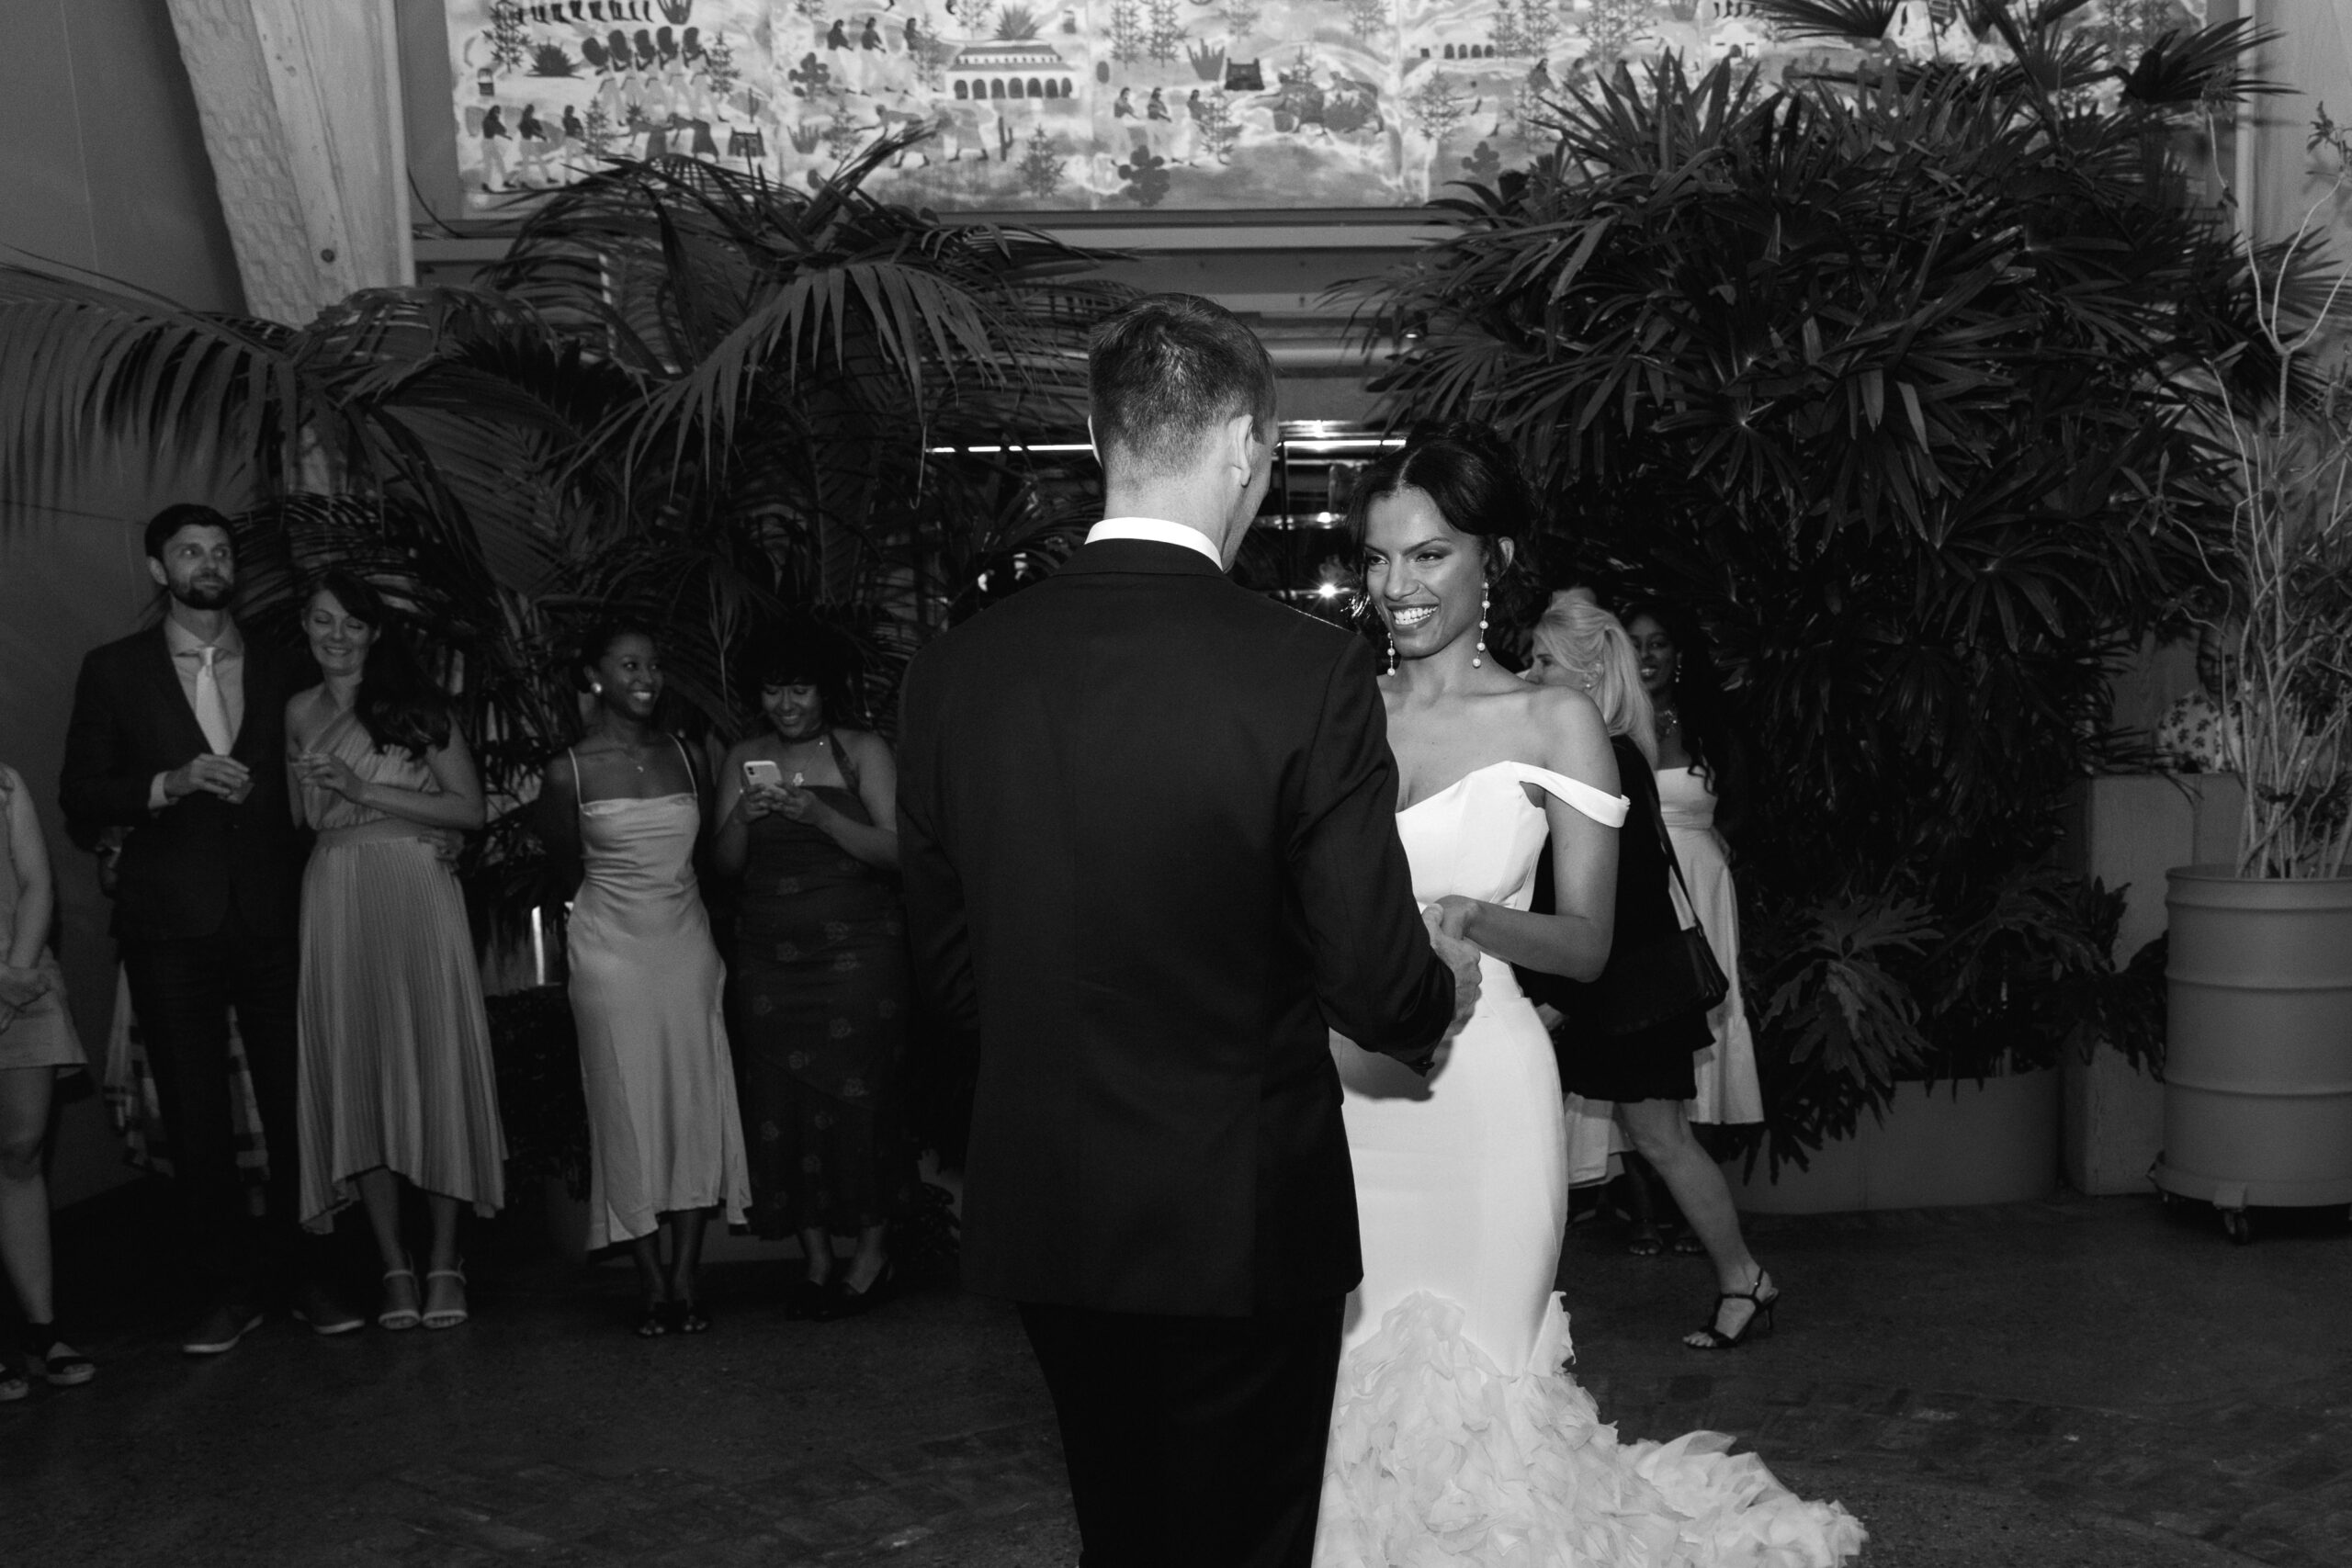 direct flash black and white wide photo of bride and groom sharing their first dance